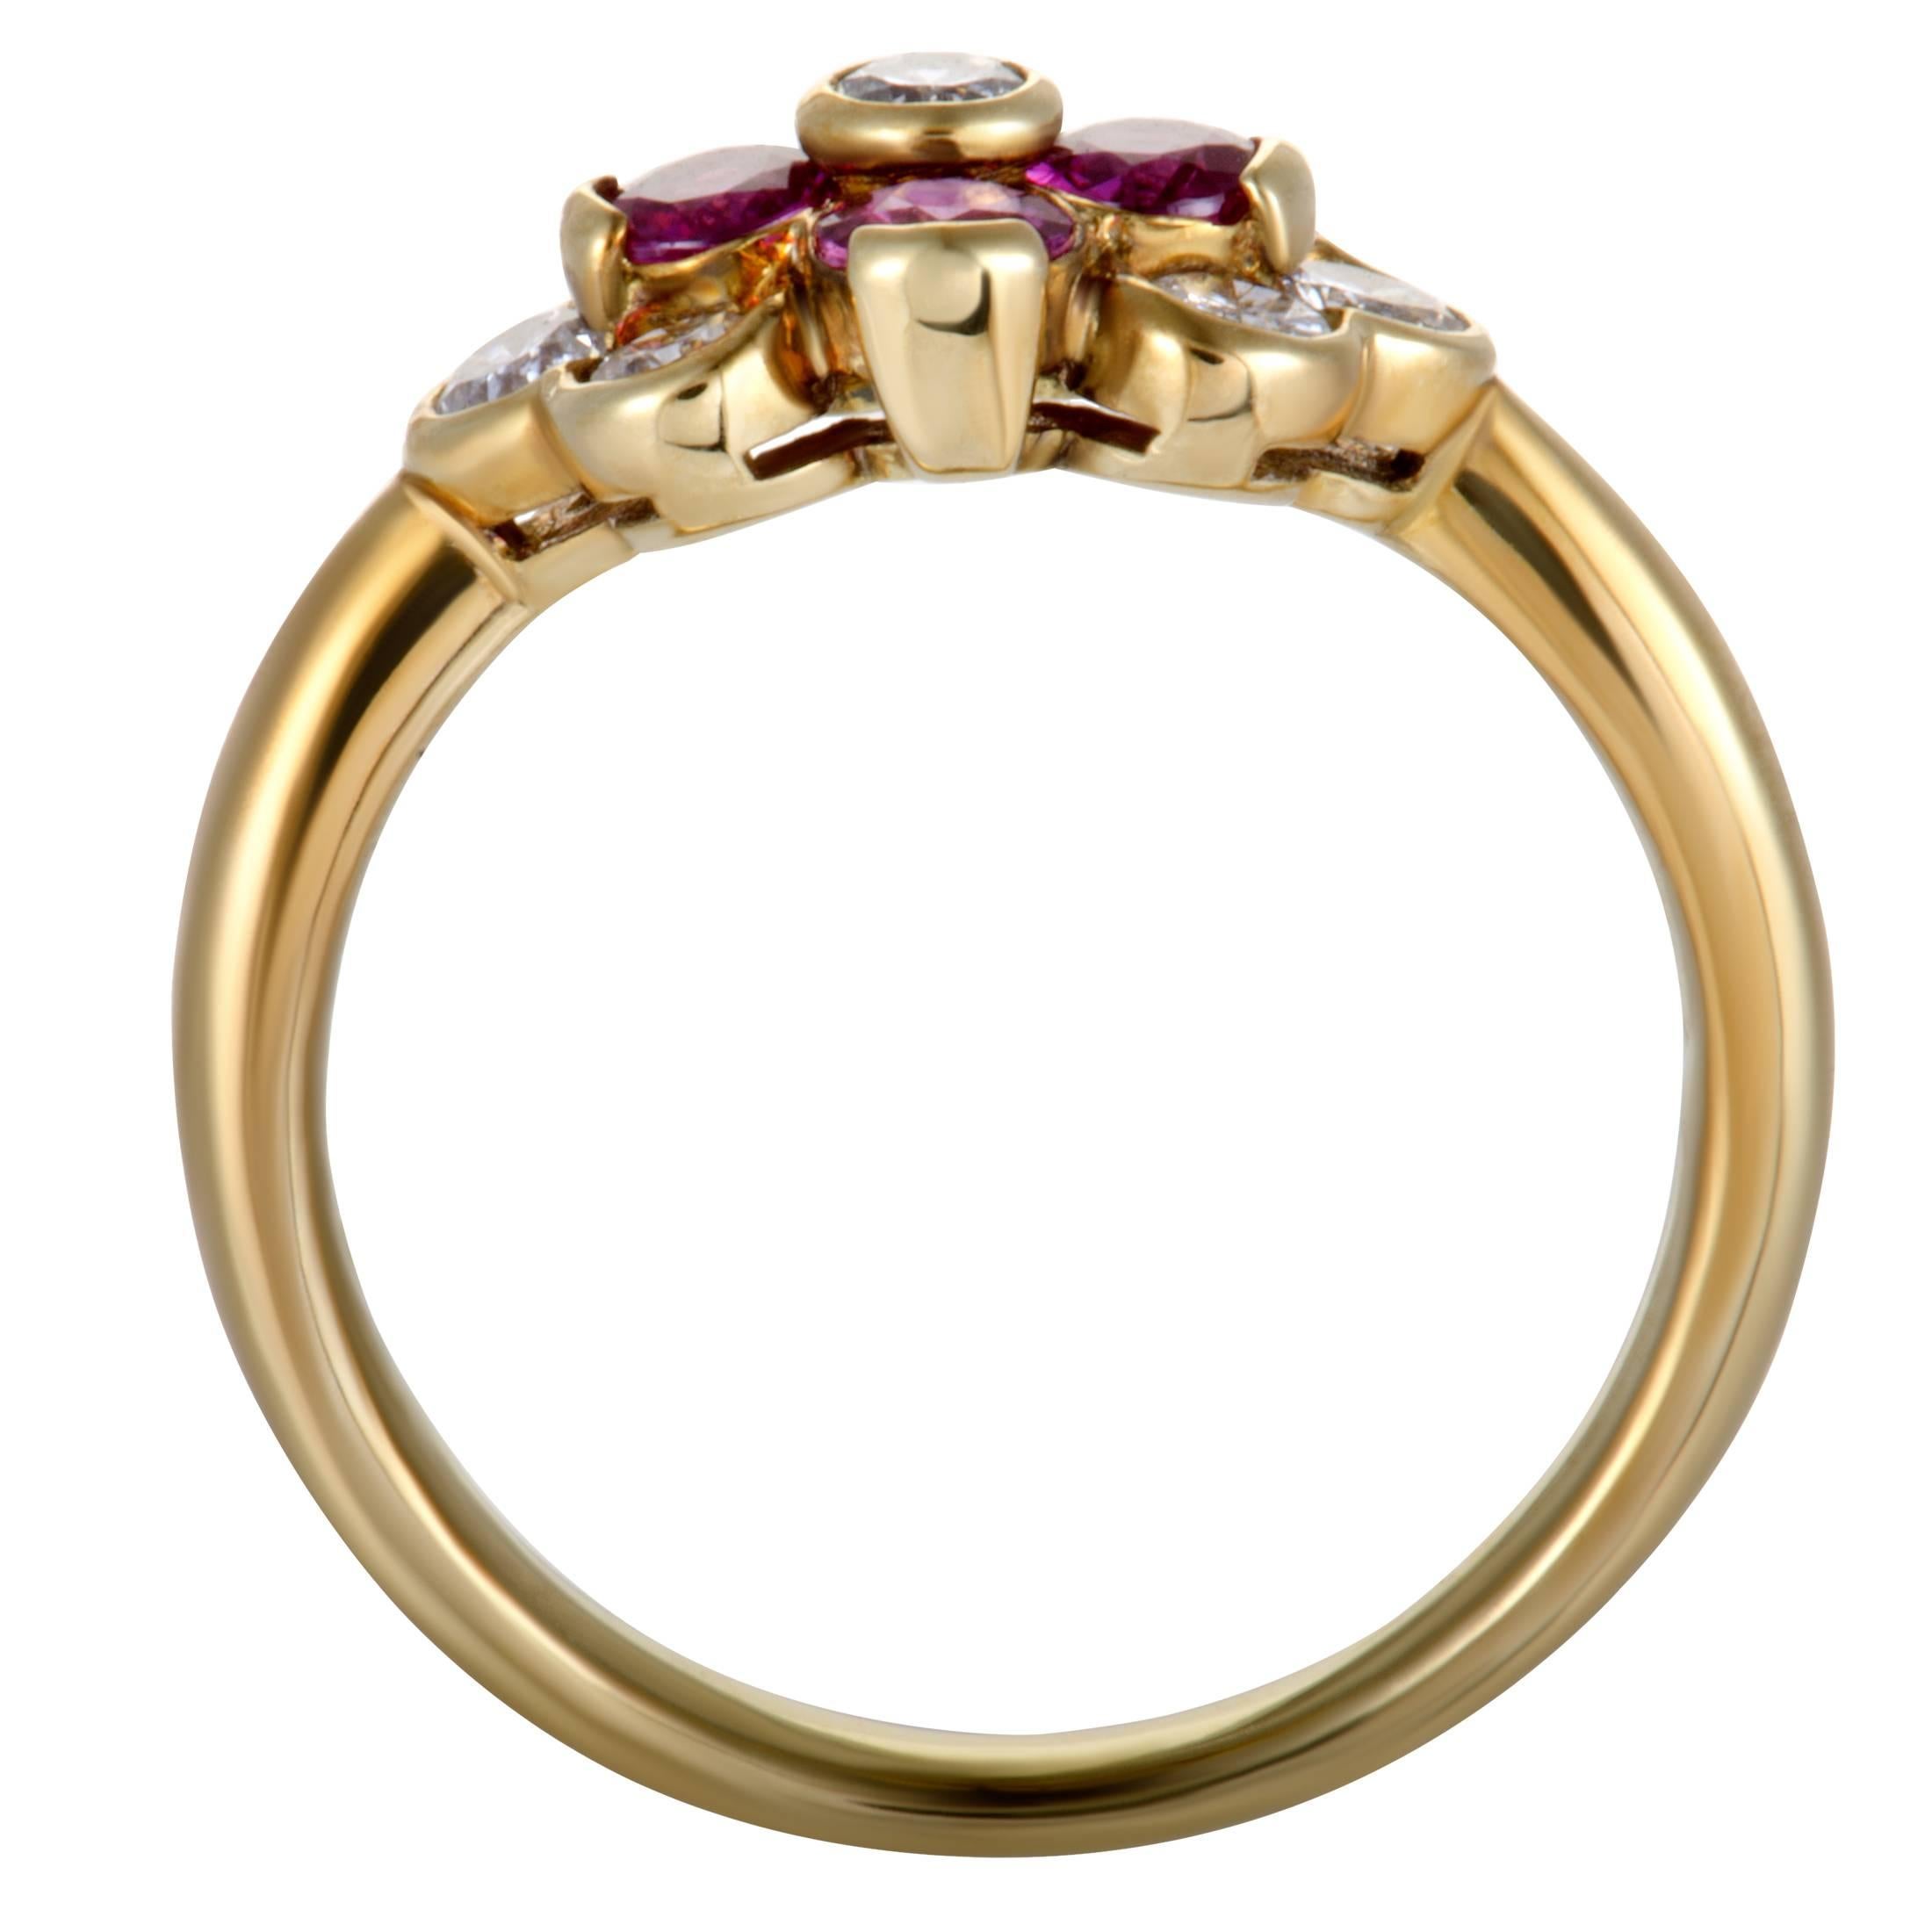 Endearingly dainty and feminine, this gorgeous ring made of 18K yellow gold features imaginative design and eye-catching décor. The ring is set with glistening diamonds and captivating rubies that weigh in total 0.44 and 0.58 carats